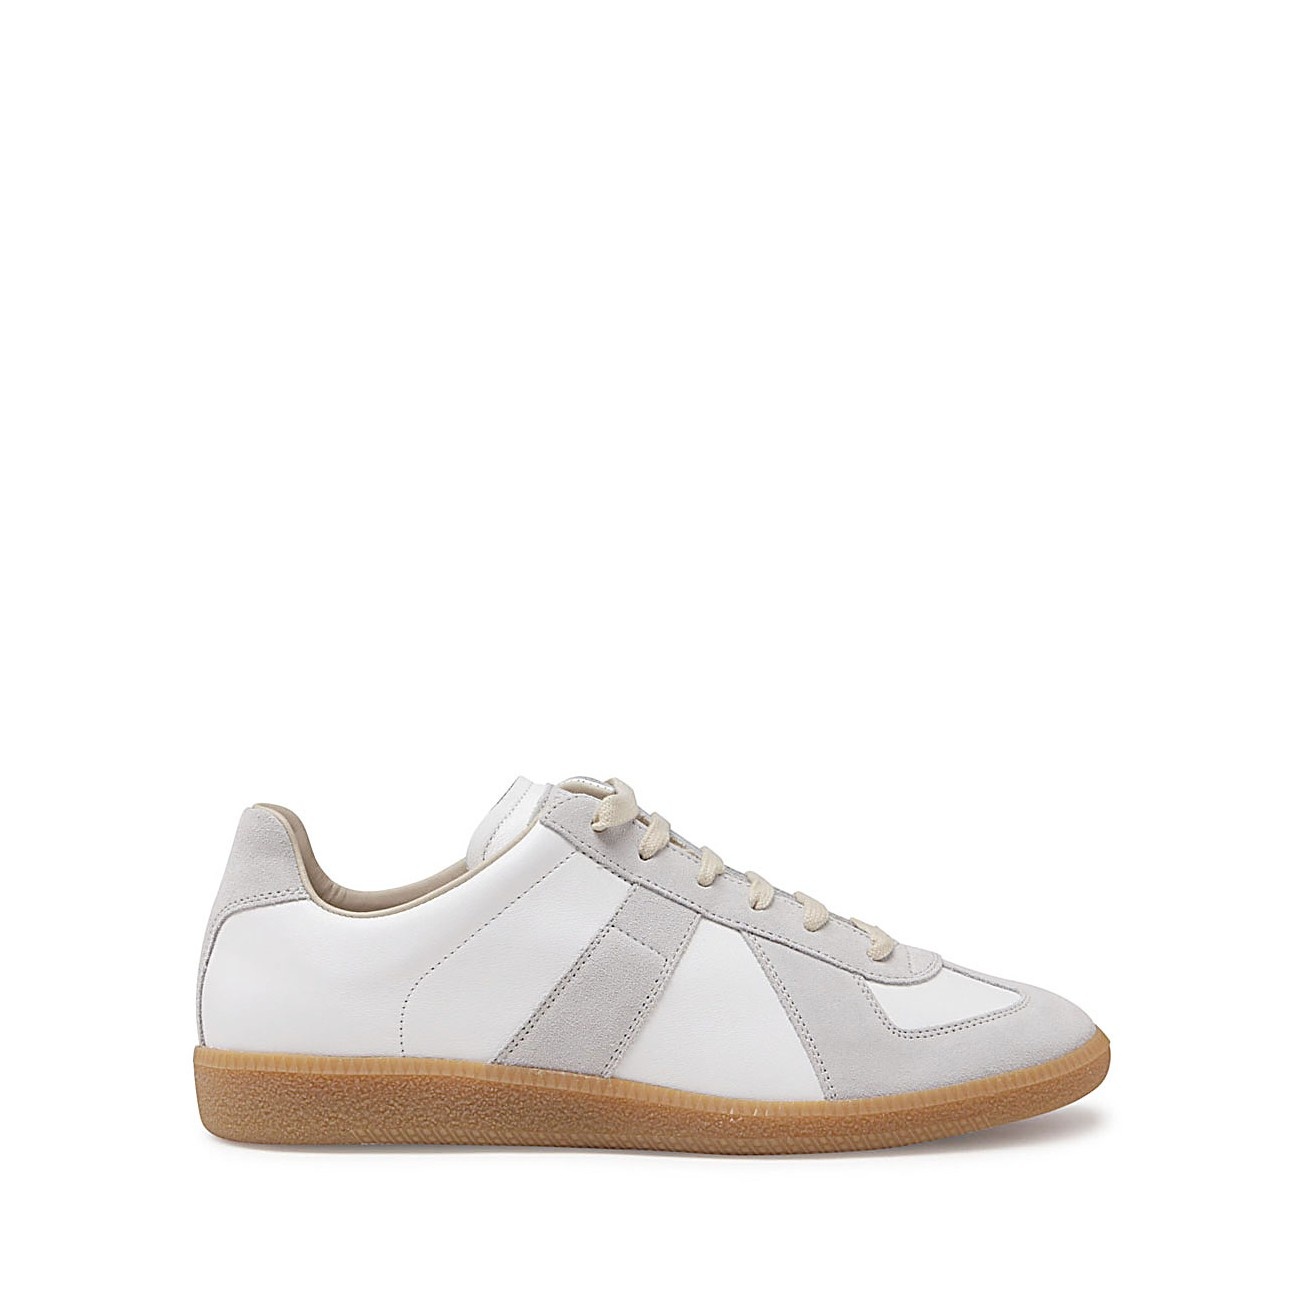 white and grey leather replica sneakers - 1